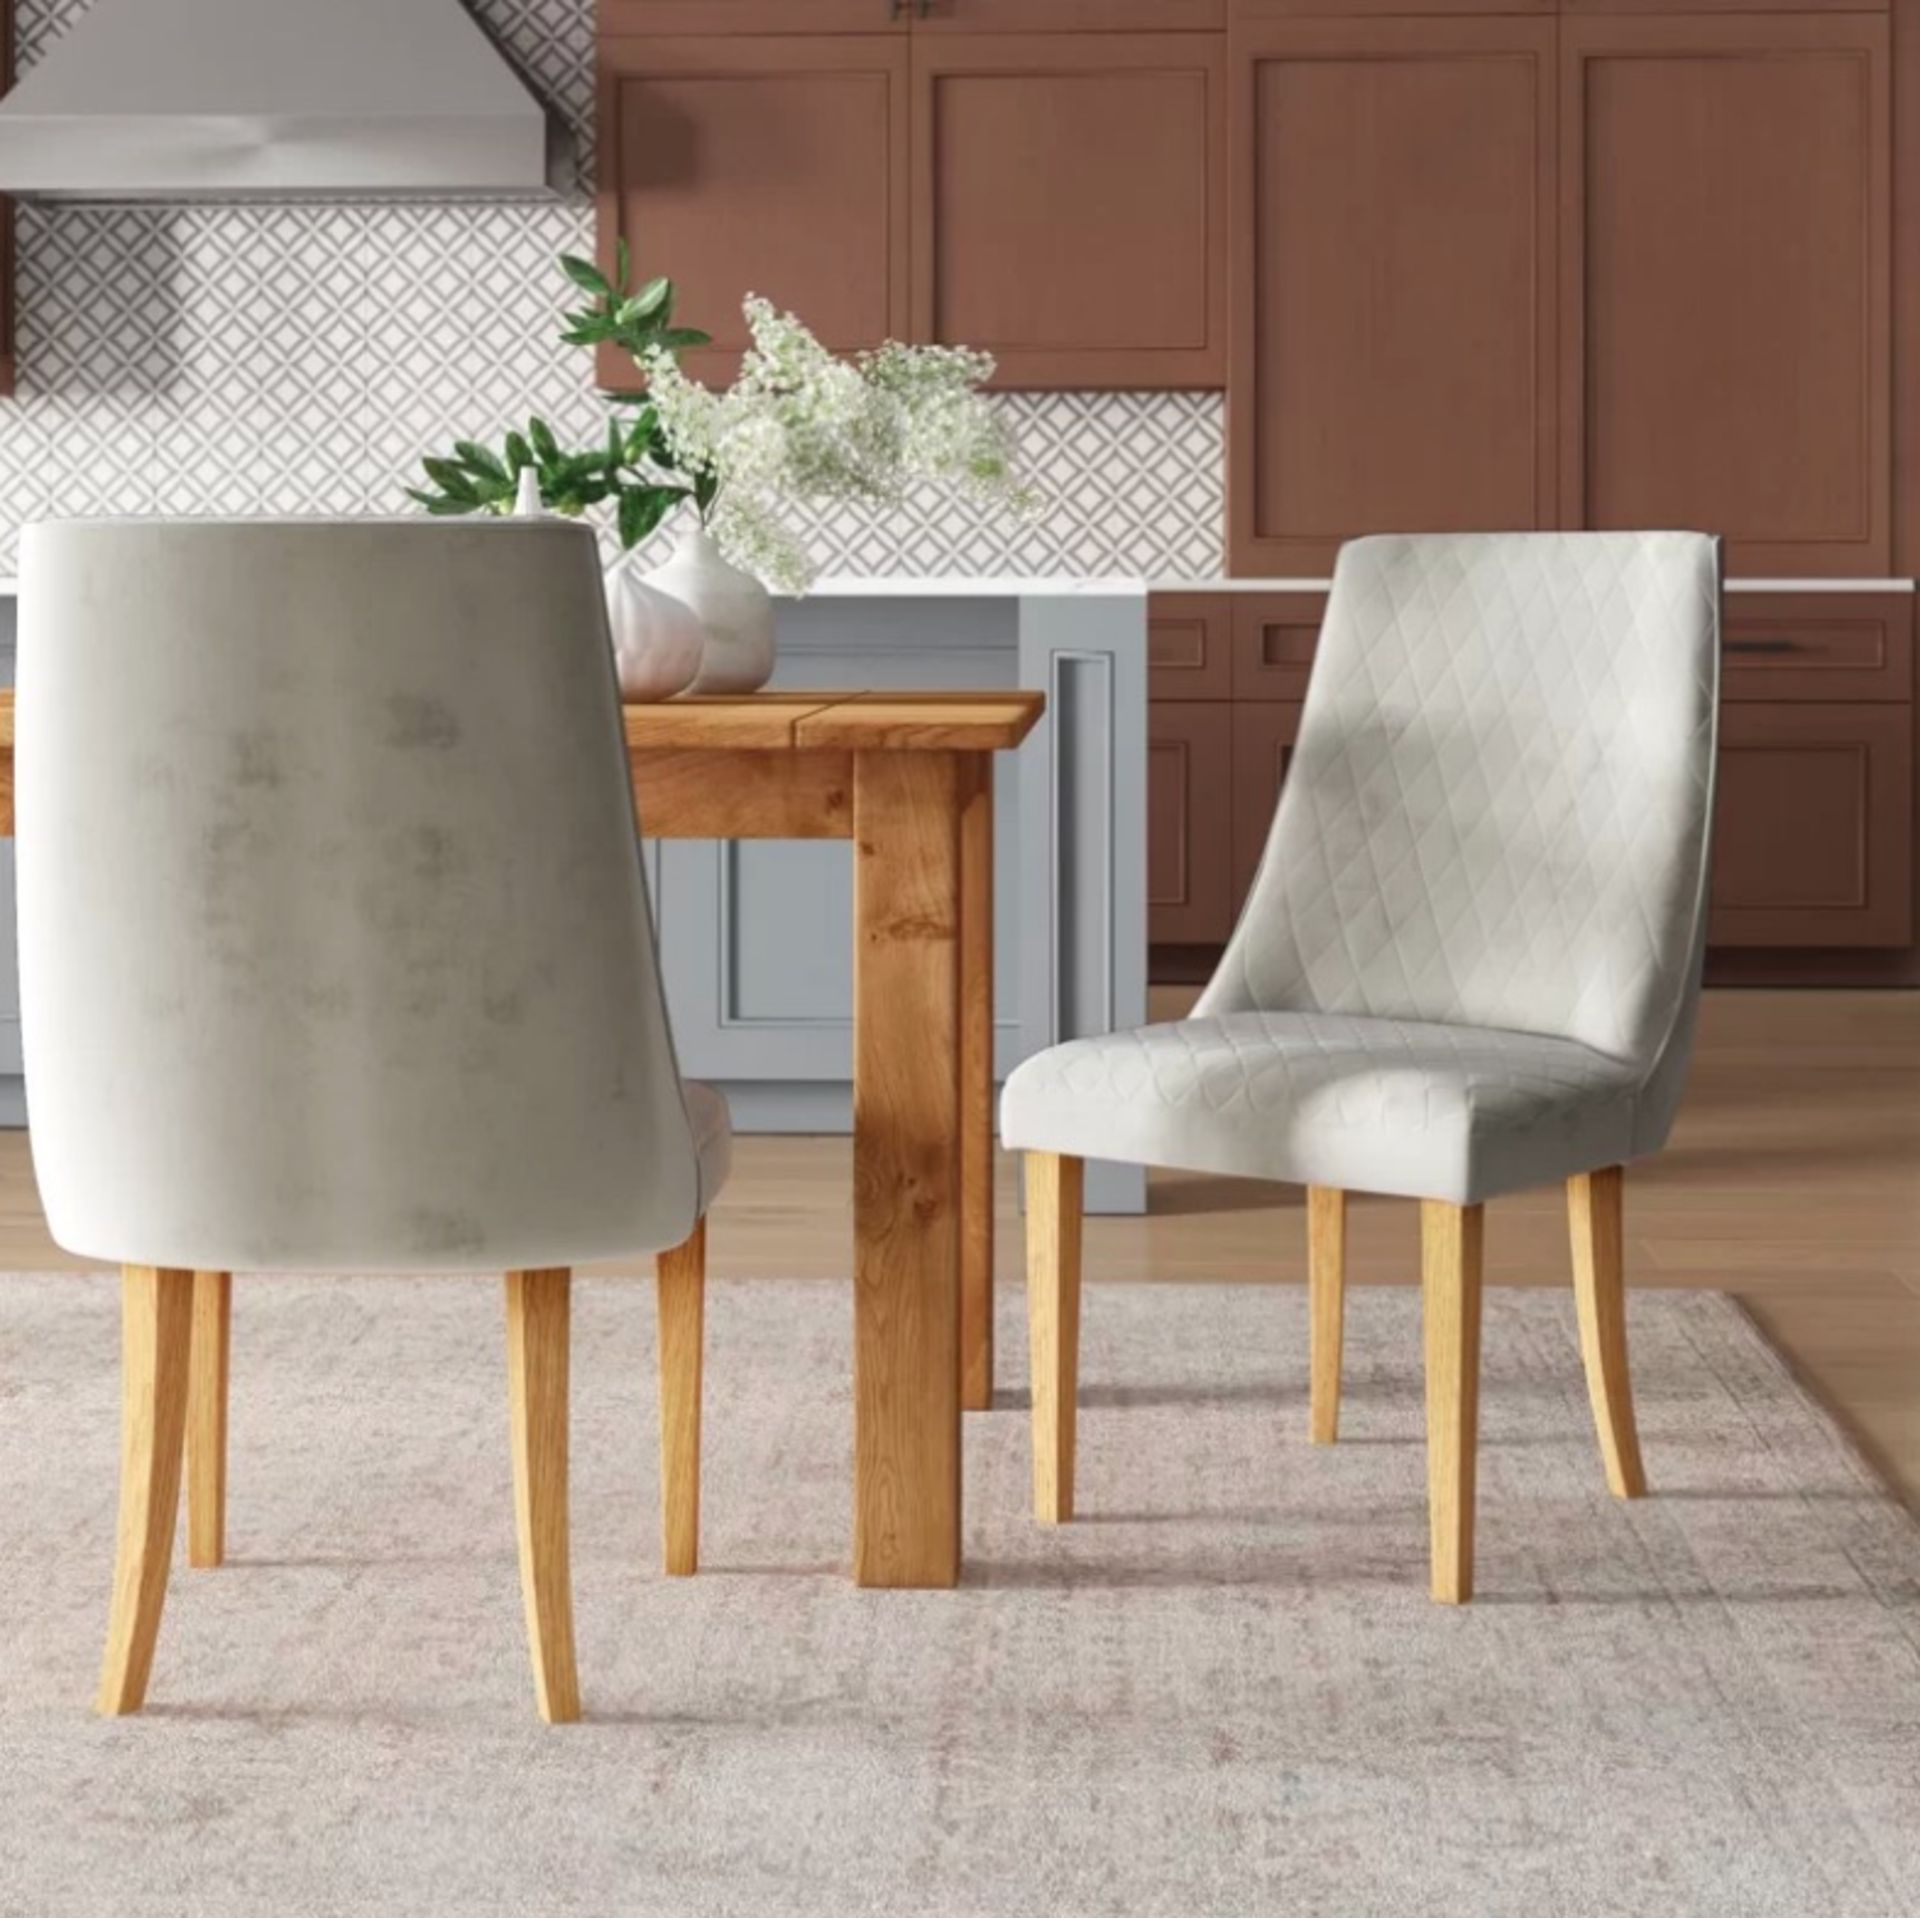 Chester dining chair Set of 2 silver upholstered solid wood dining chairs modern and stylish 96cm